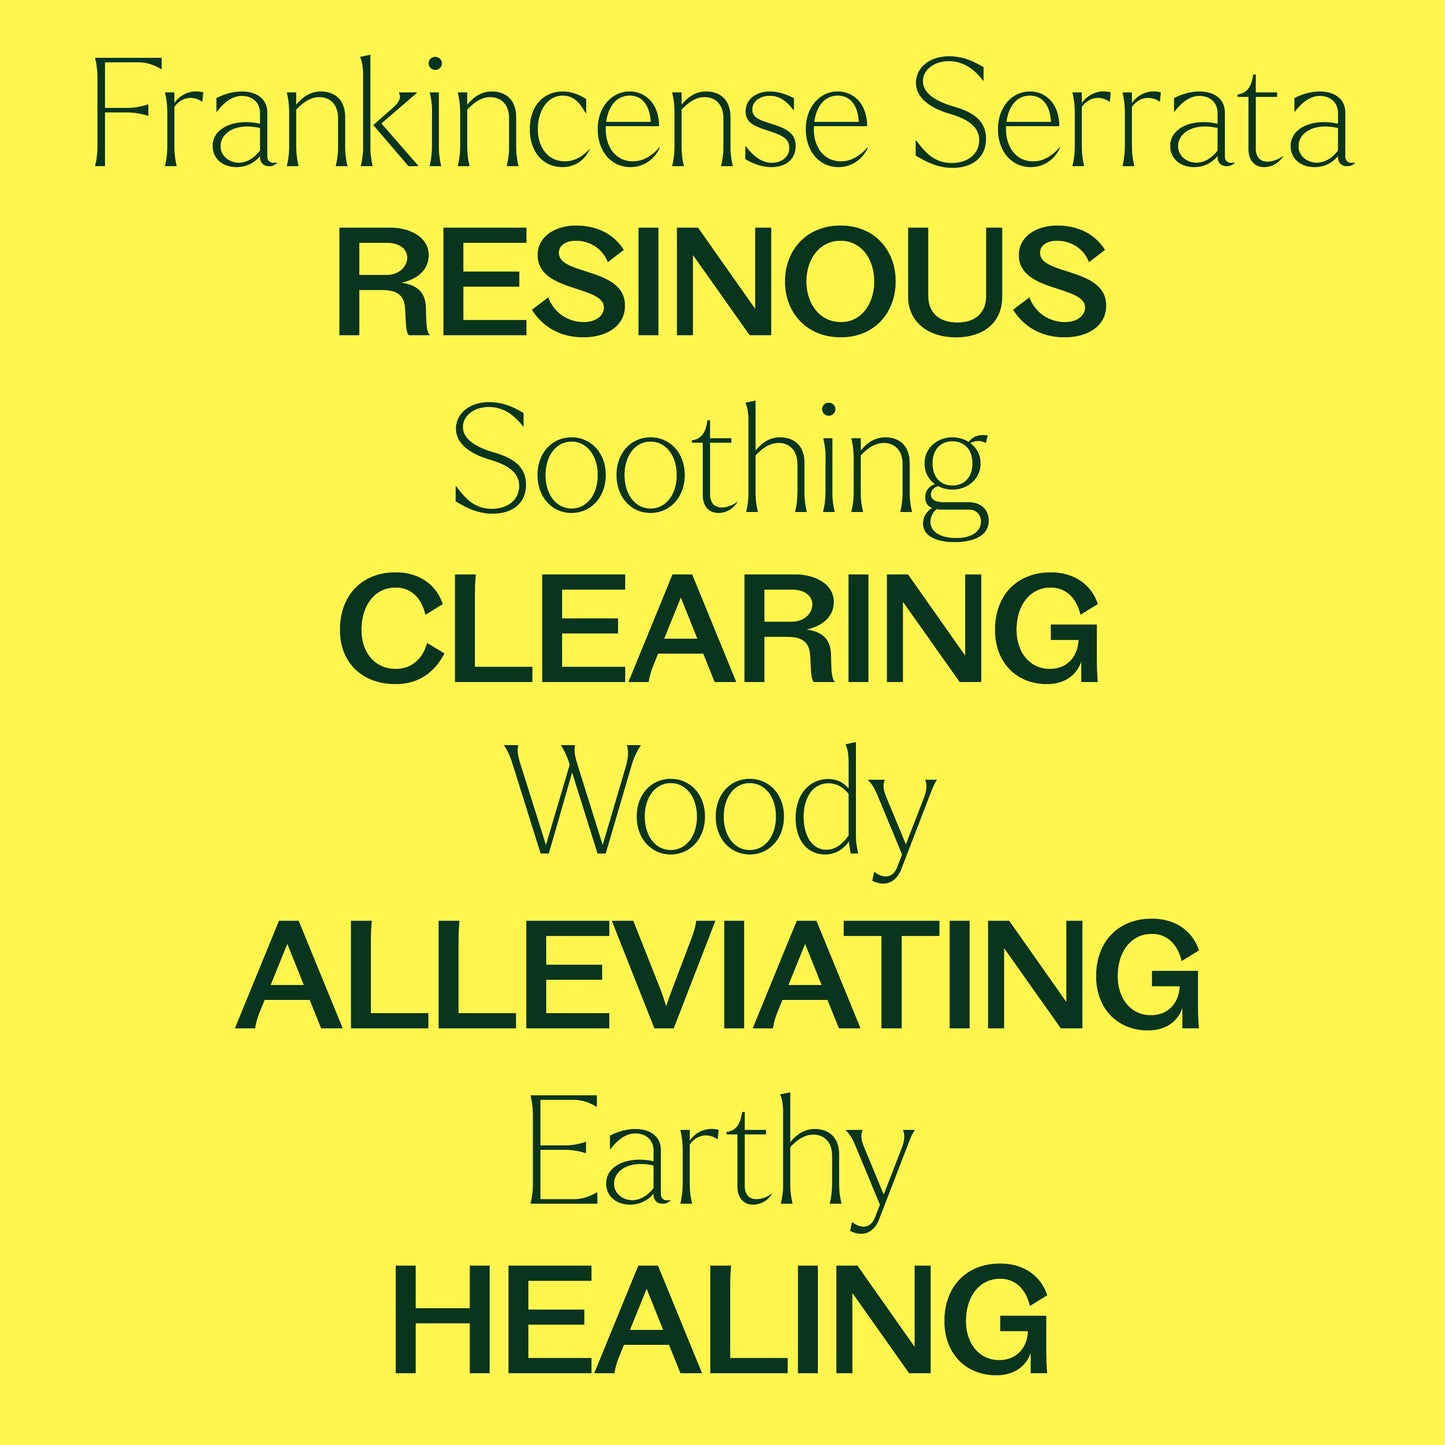 Organic Frankincense Serrata Essential Oil is soothing, clearing, woody, alleviating, earthy and healing